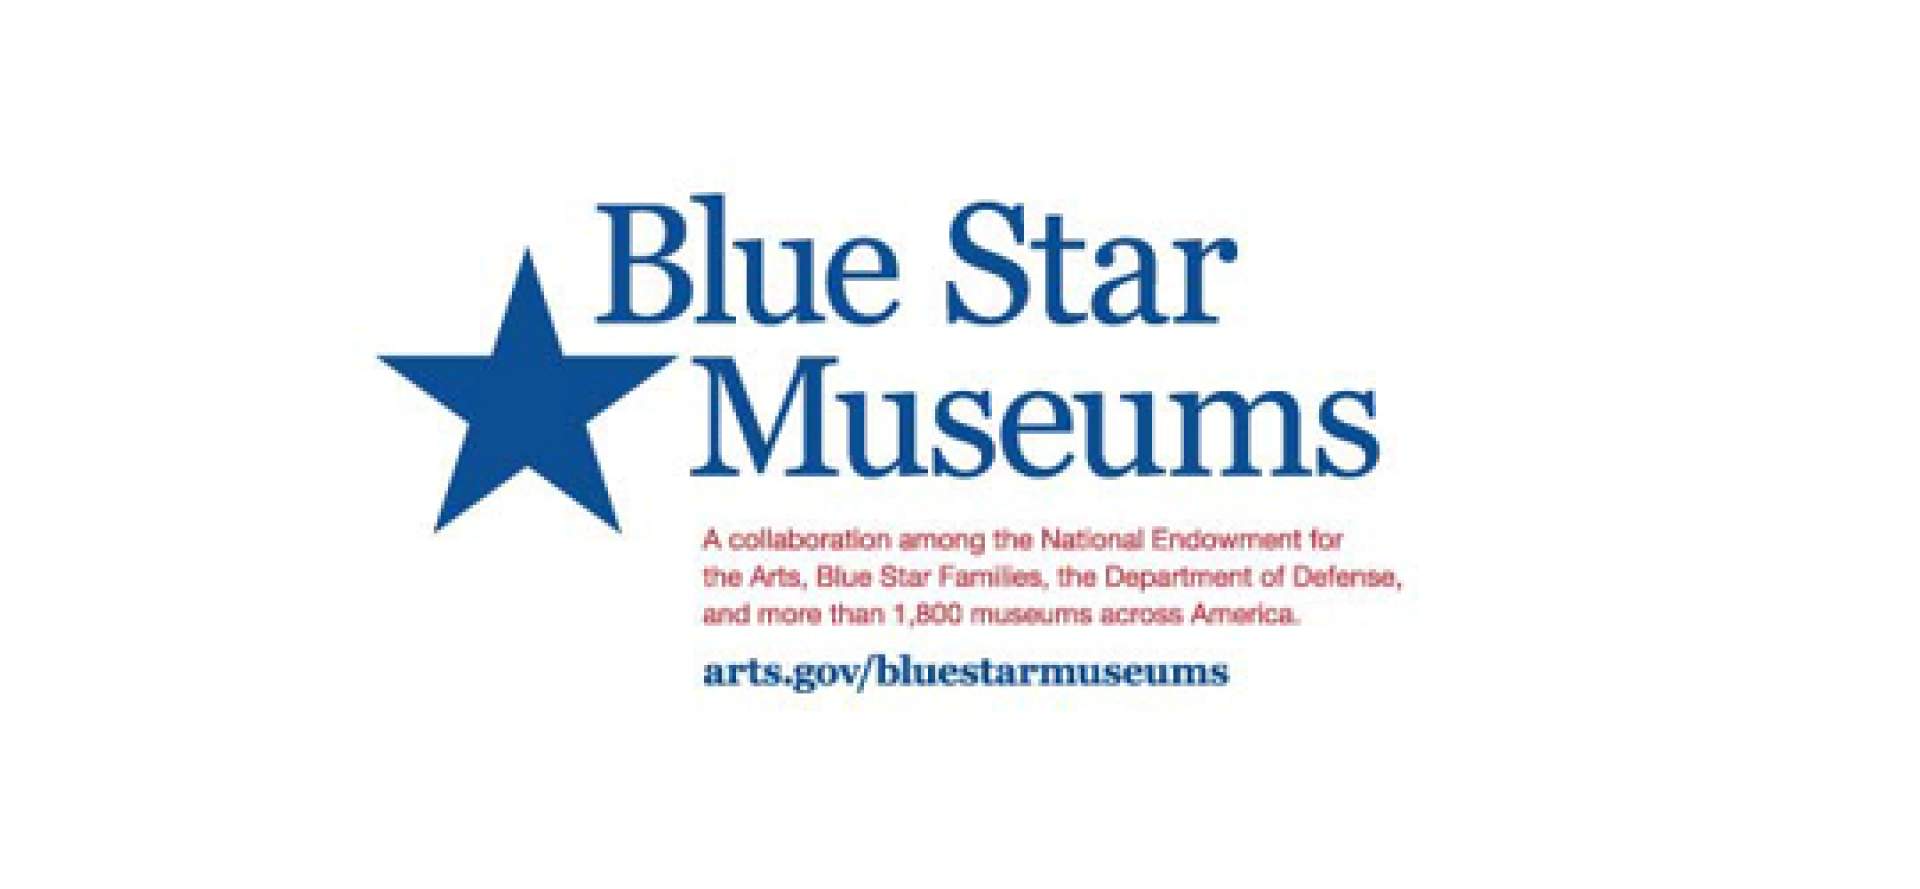 General Martin Dempsey, Chairman of the Joint Chiefs of Staff, Thanks Museums for Being "Blue Star"